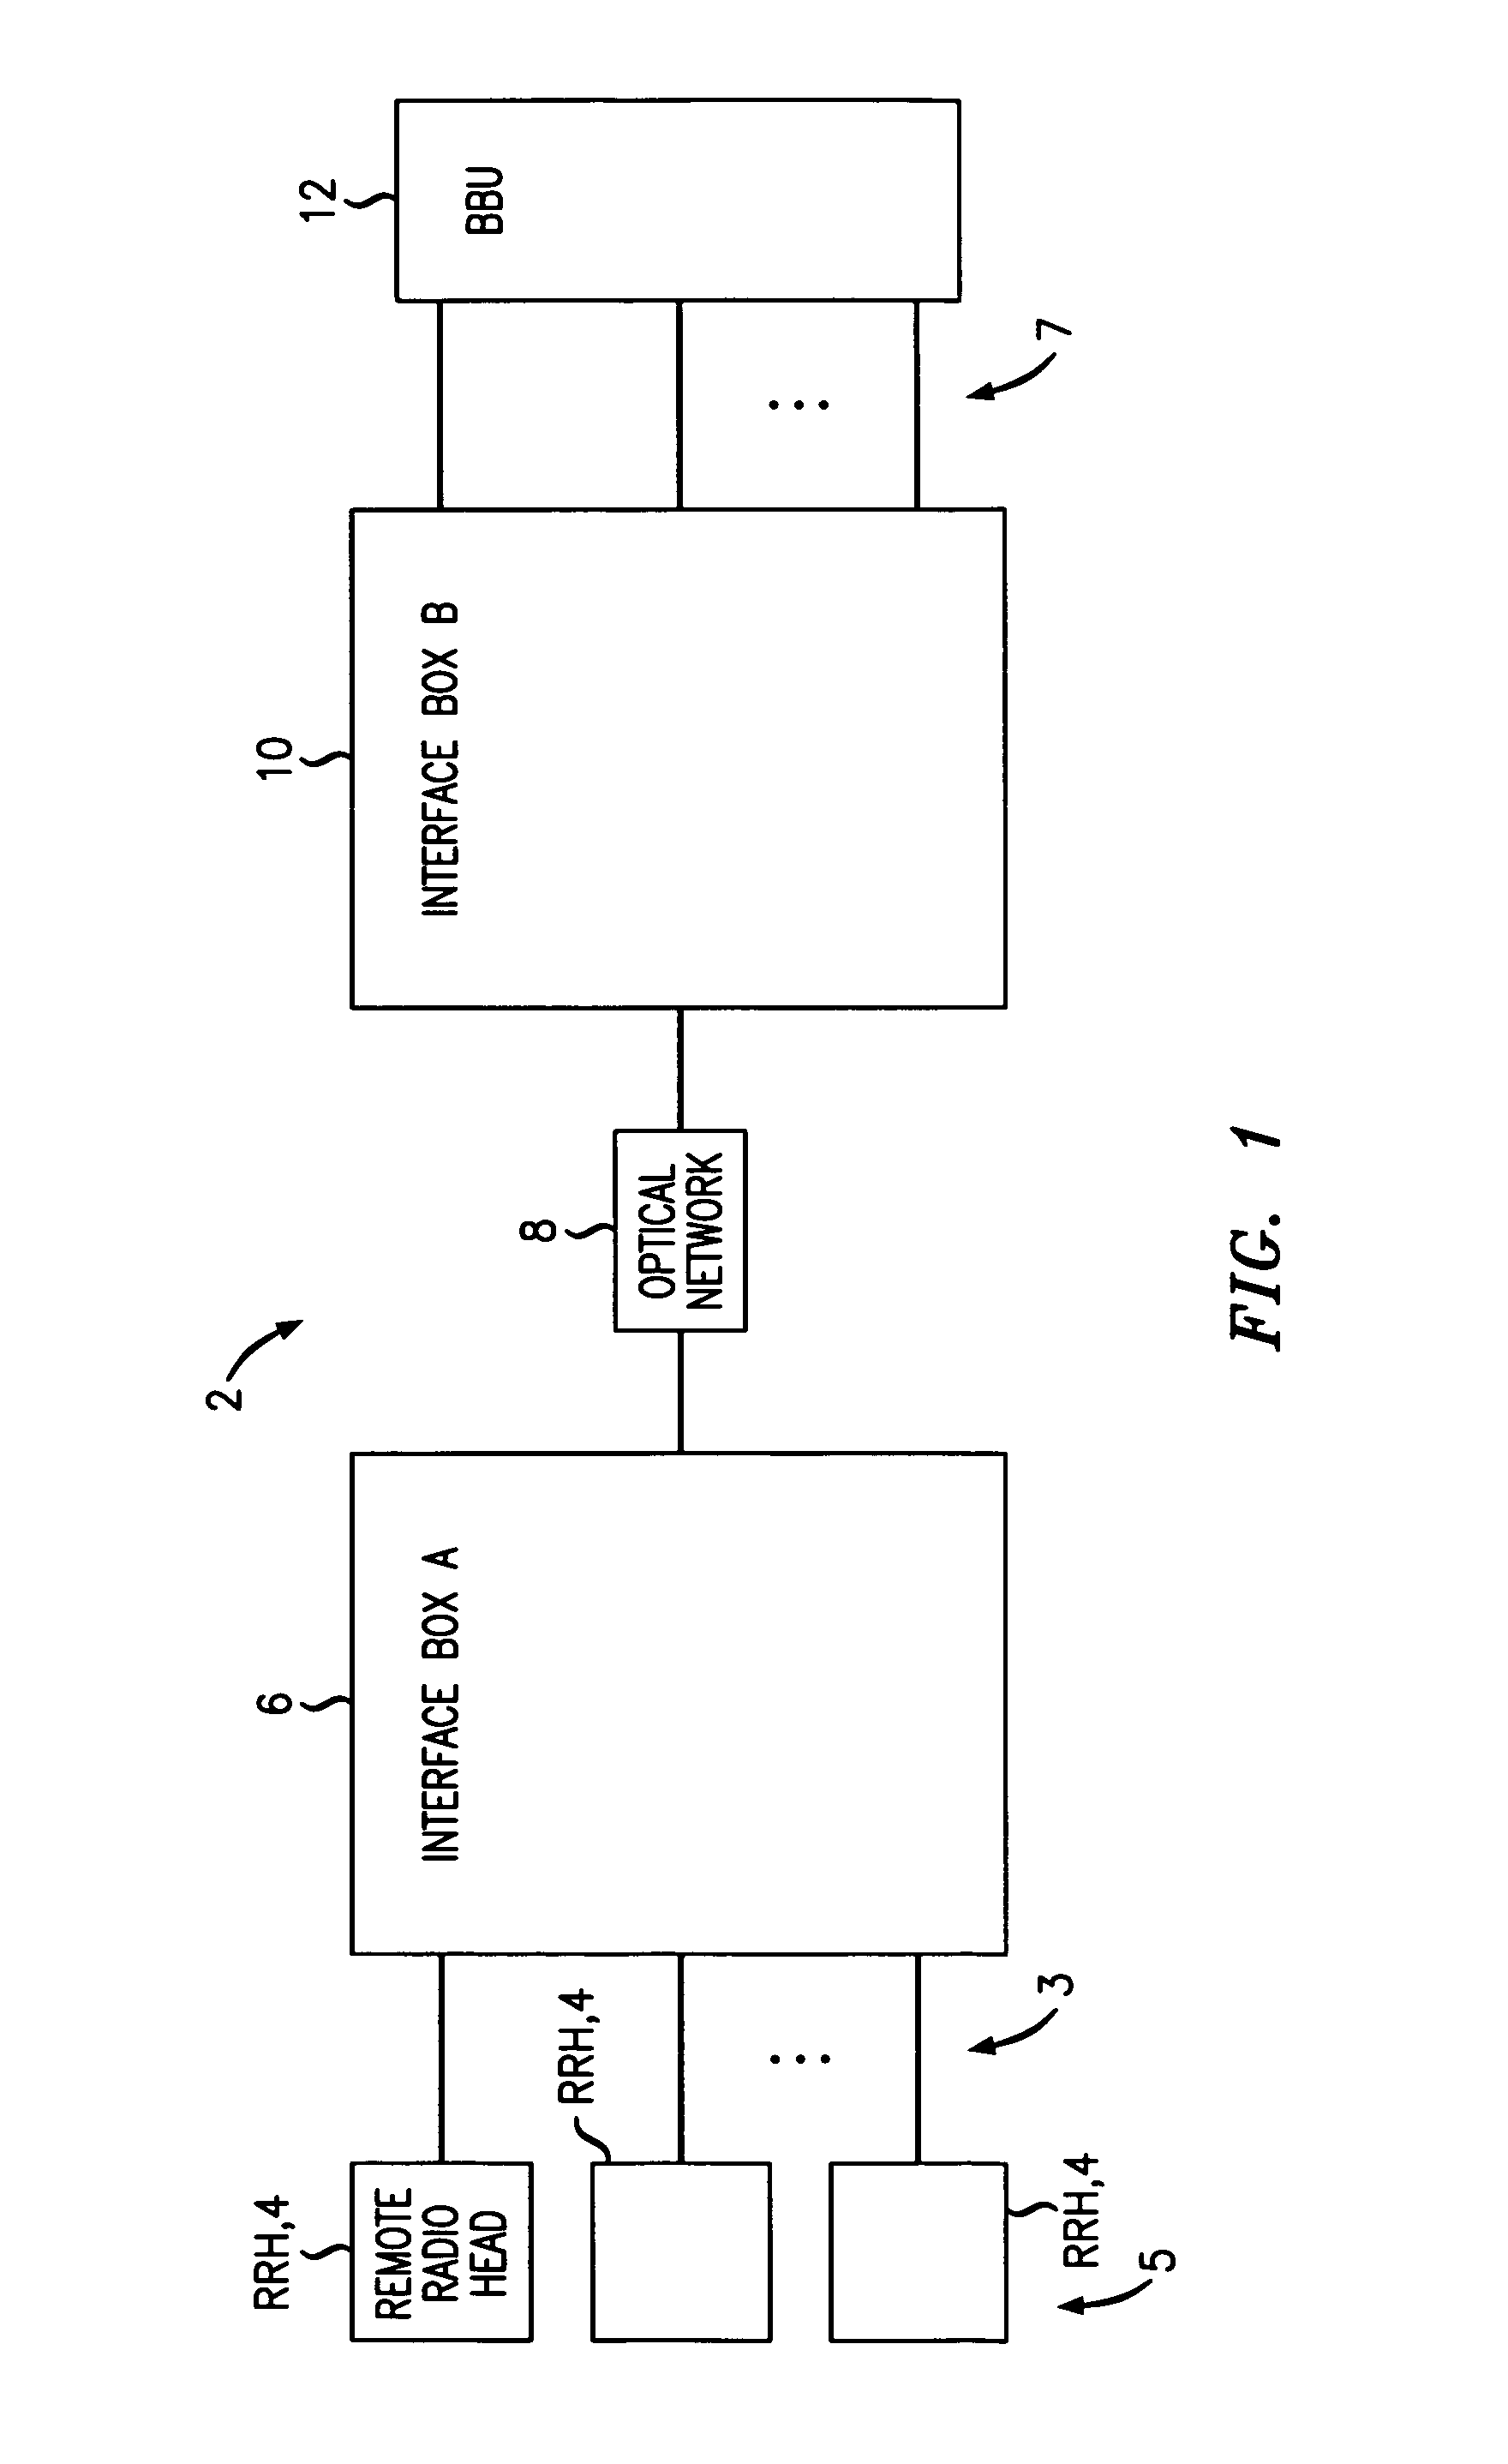 A method of processing a digital signal for transmission, a method of processing an optical data unit upon reception, and a network element for a telecommunications network